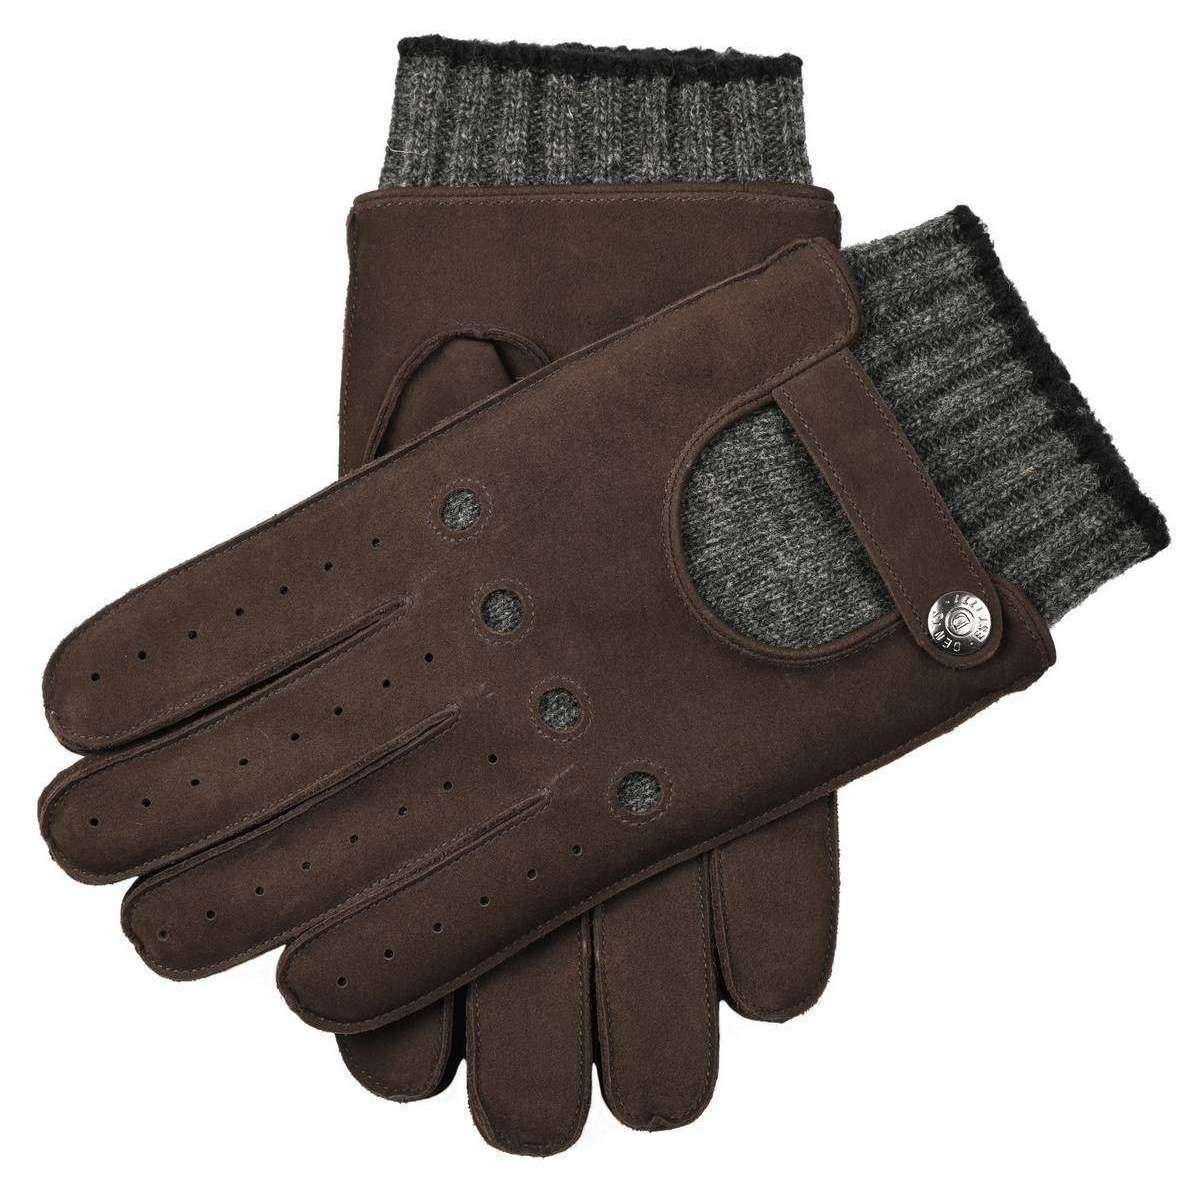 Dents Hambledon Water Resistant Gloves - Brown/Charcoal